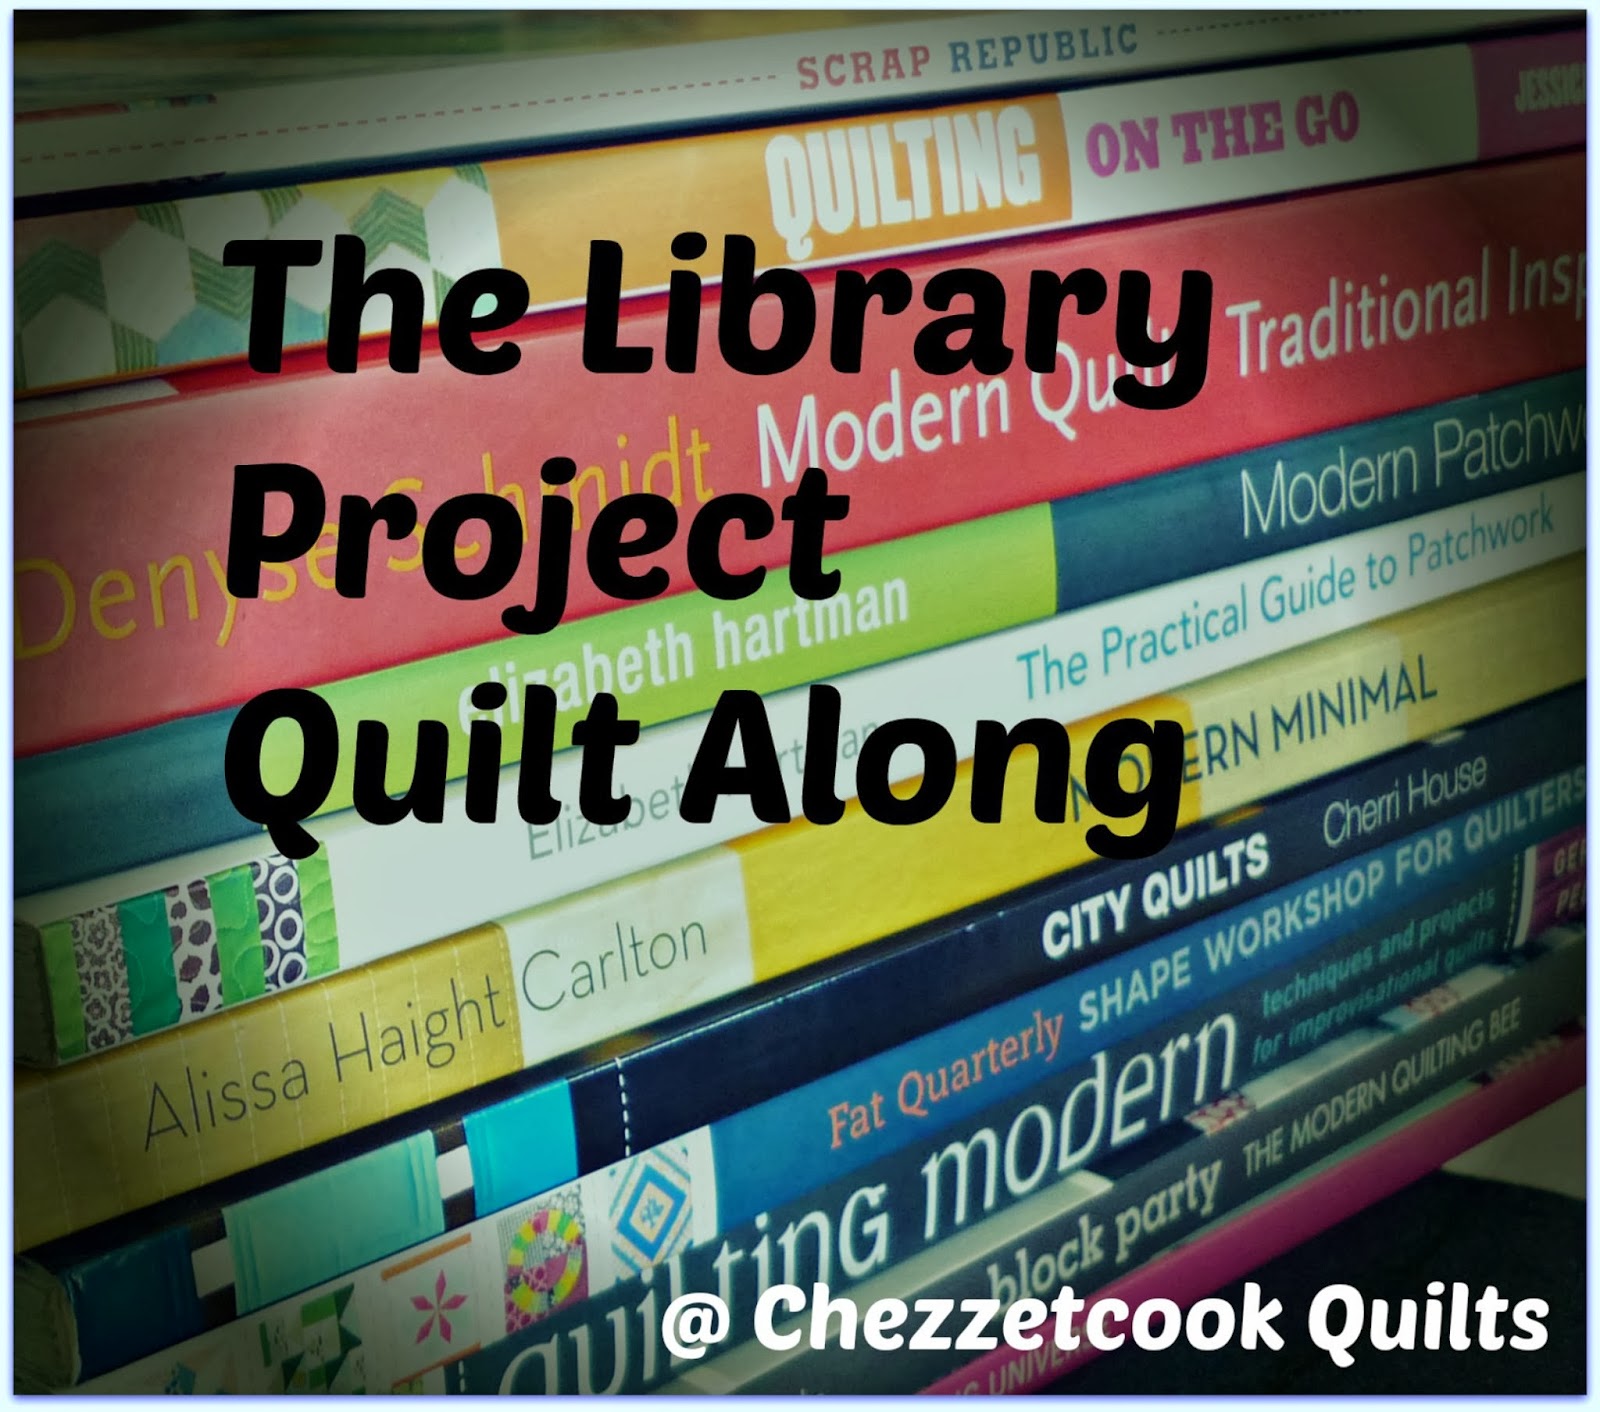 http://chezzetcookmodernquilts.blogspot.ca/p/the-library-project.html